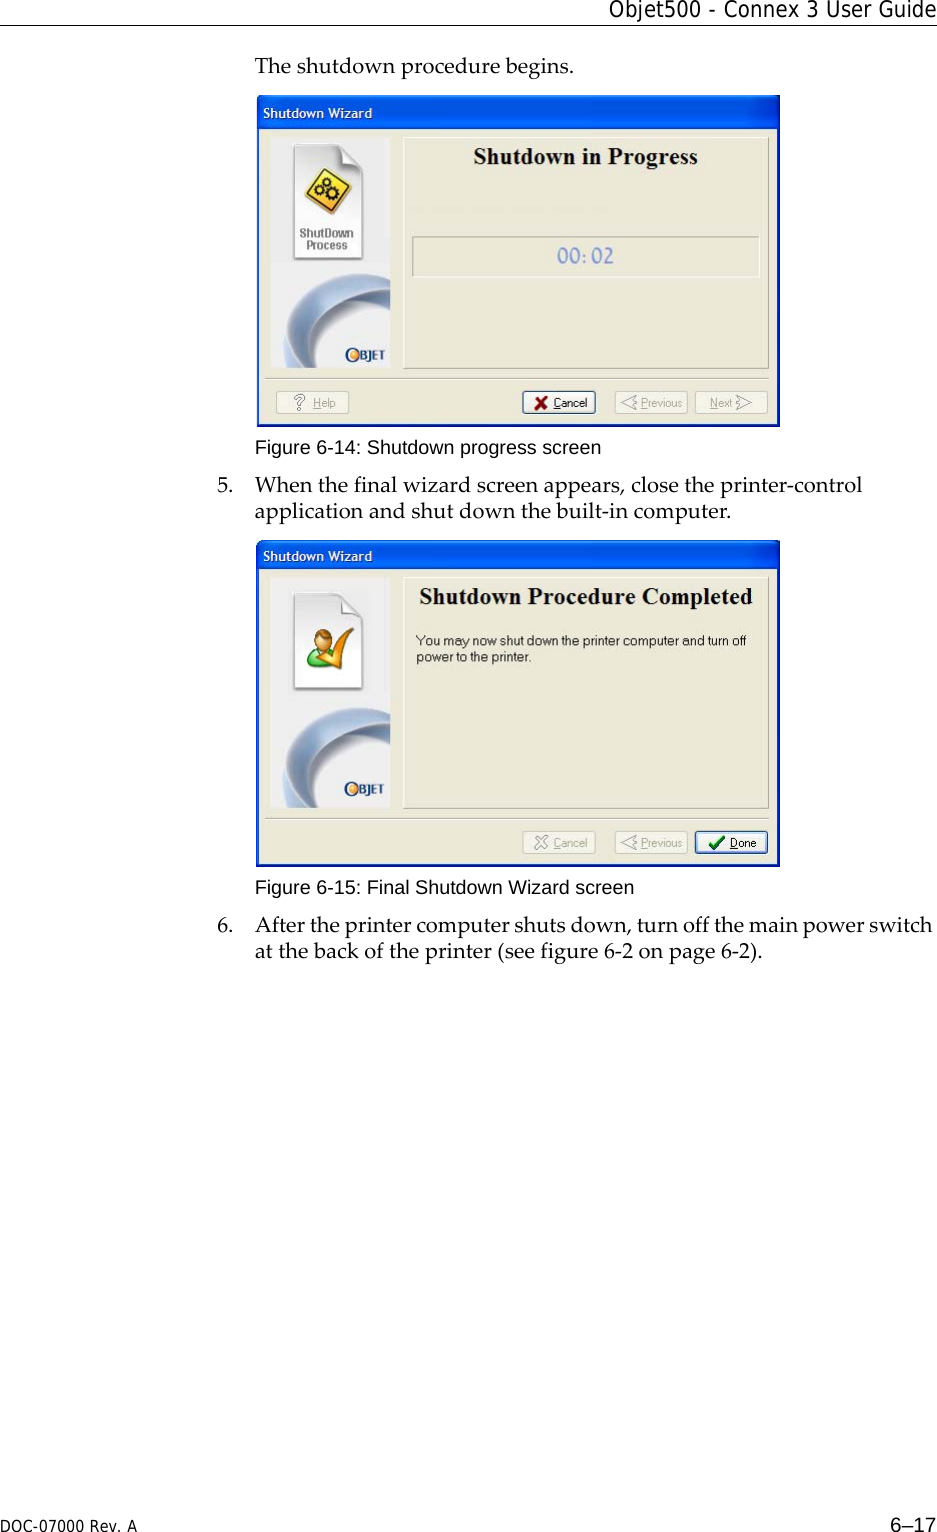 DOC-07000 Rev. A 6–17Objet500 - Connex 3 User GuideTheshutdownprocedurebegins.Figure 6-14: Shutdown progress screen5. Whenthefinalwizardscreenappears,closetheprinter‐controlapplicationandshutdownthebuilt‐incomputer.Figure 6-15: Final Shutdown Wizard screen6. Aftertheprintercomputershutsdown,turnoffthemainpowerswitchatthebackoftheprinter(seefigure 6‐2onpage 6‐2).